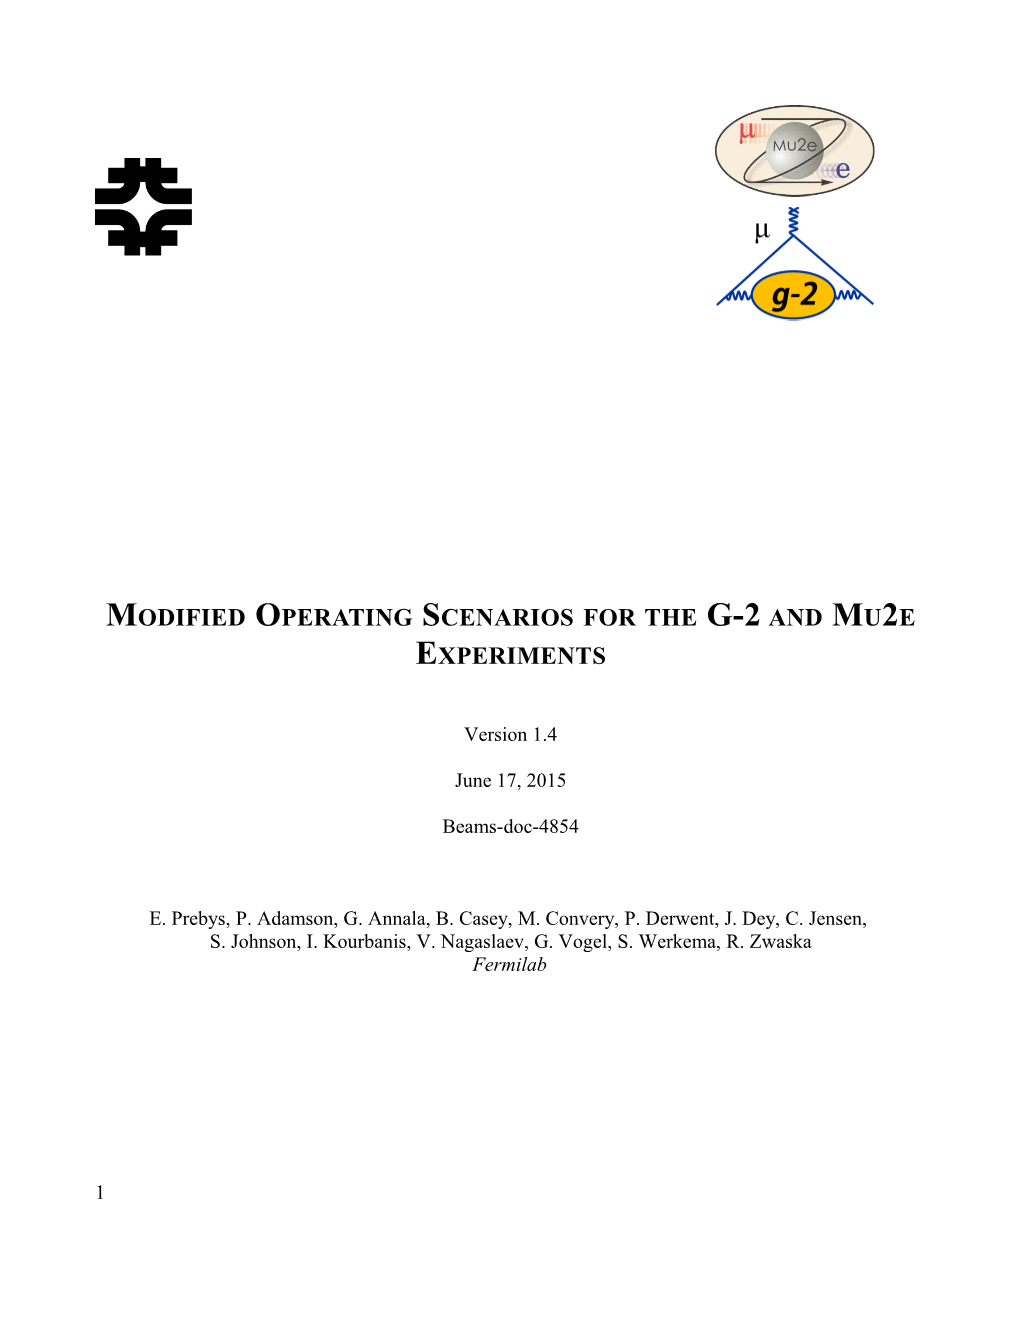 Modified Operating Scenarios for the G-2 and Mu2e Experiments